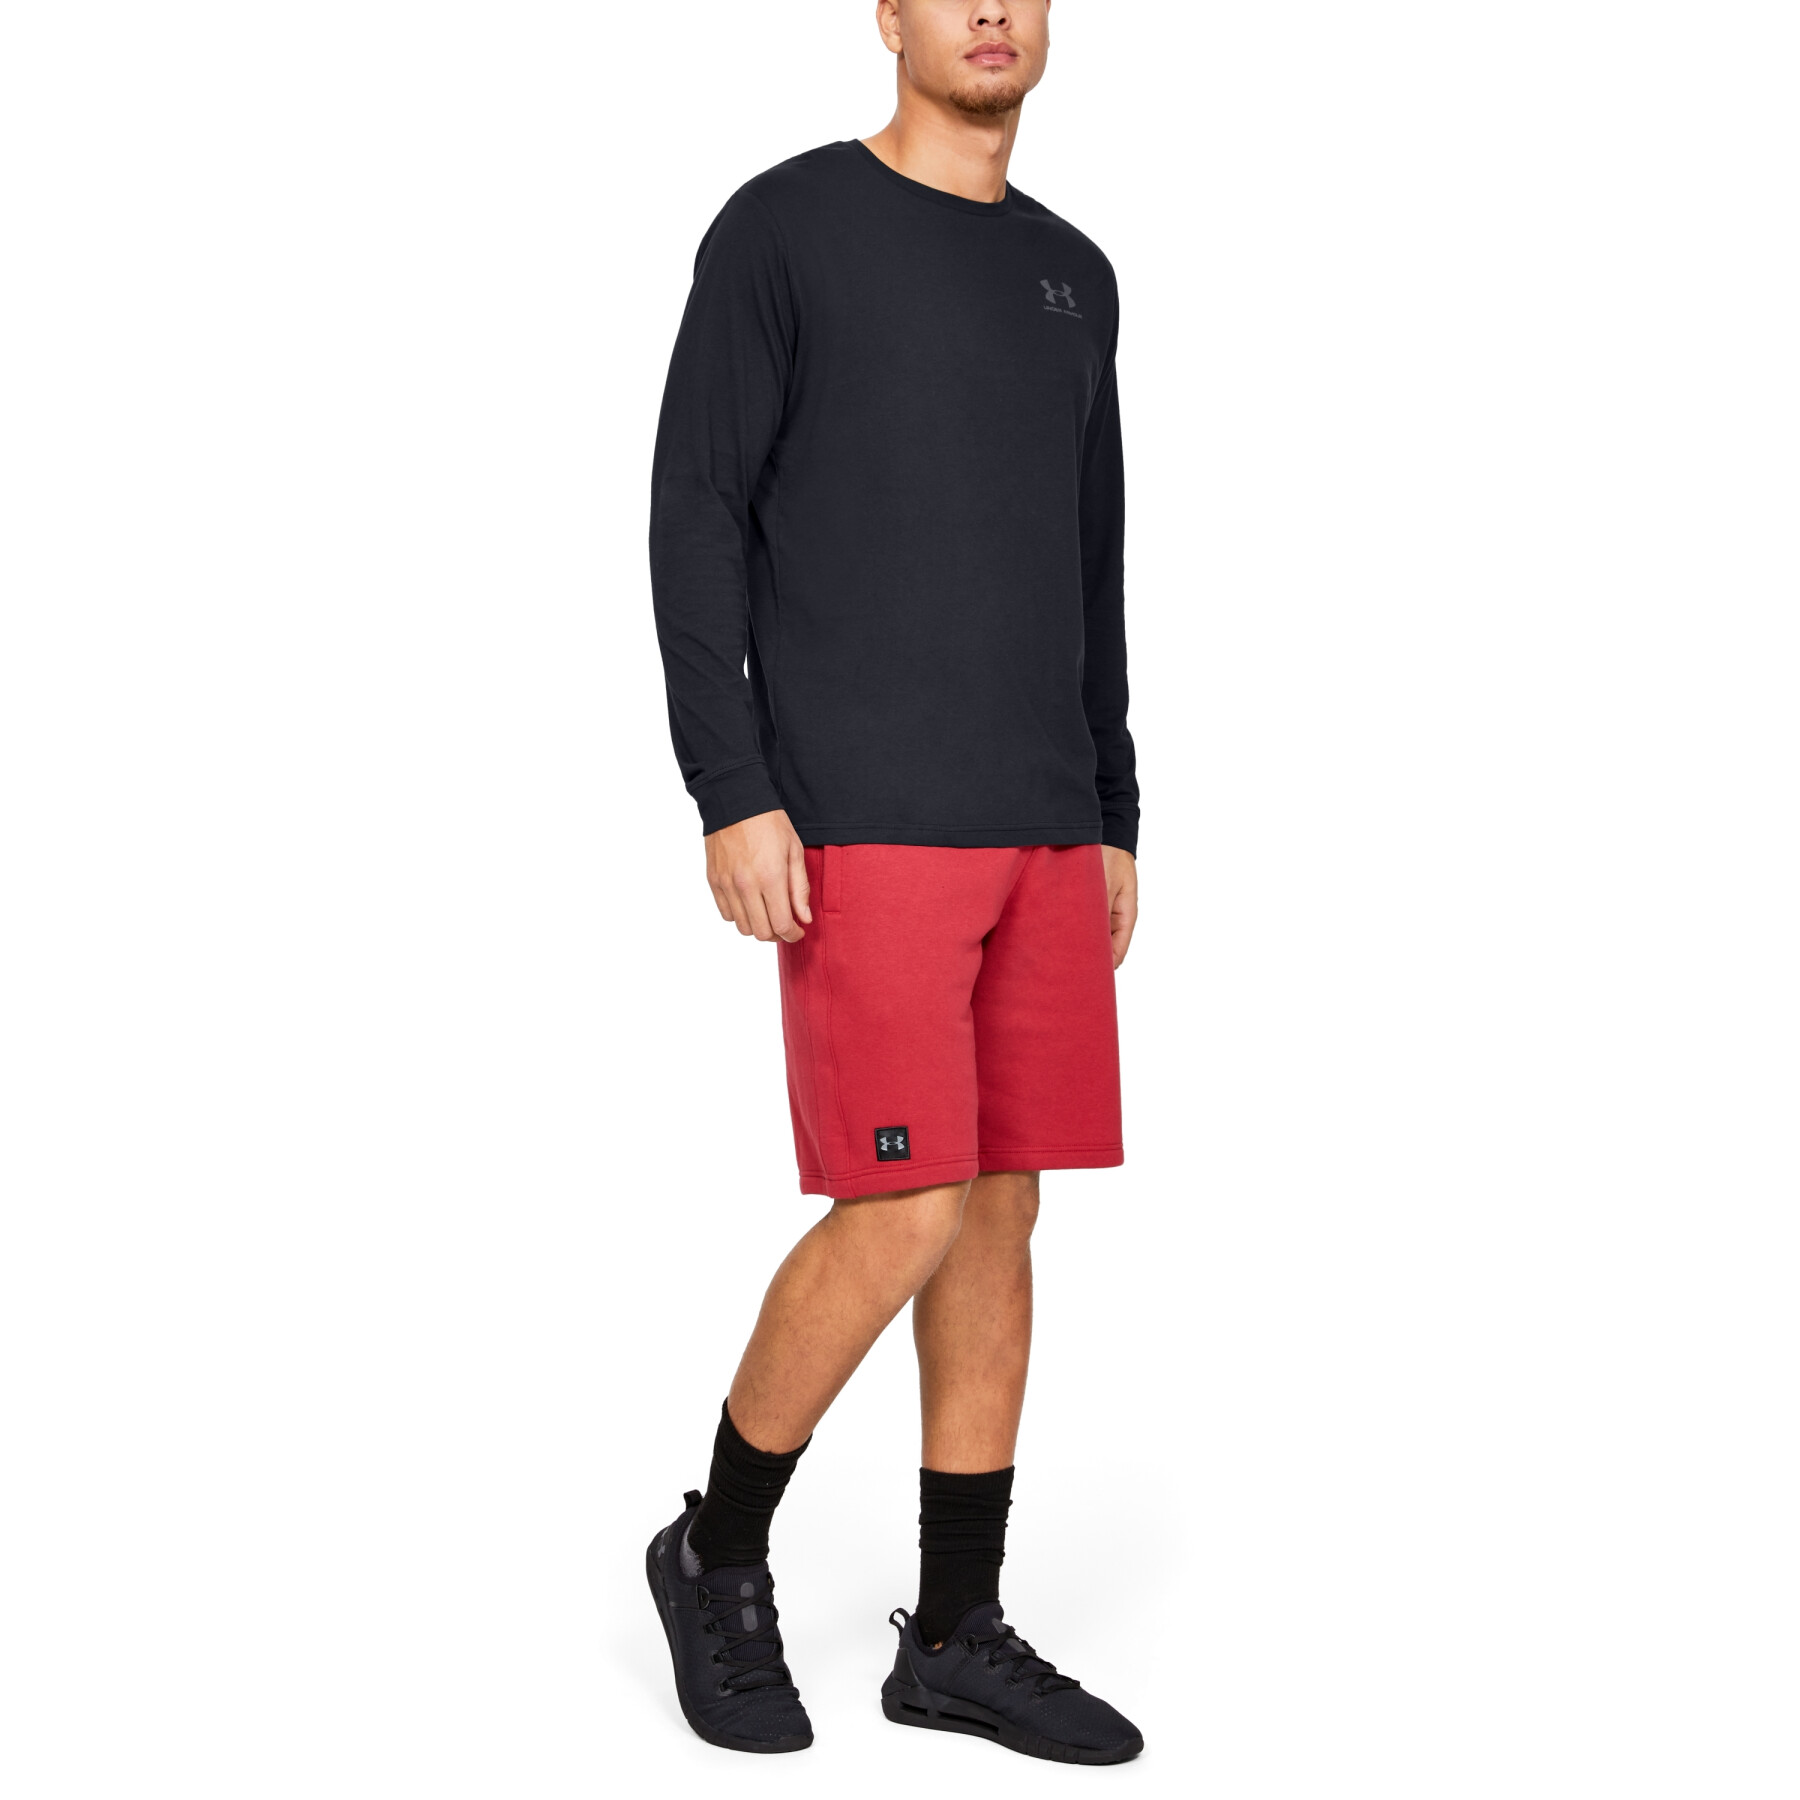 Long sleeve T-shirt Under Armour Sportstyle Left Chest